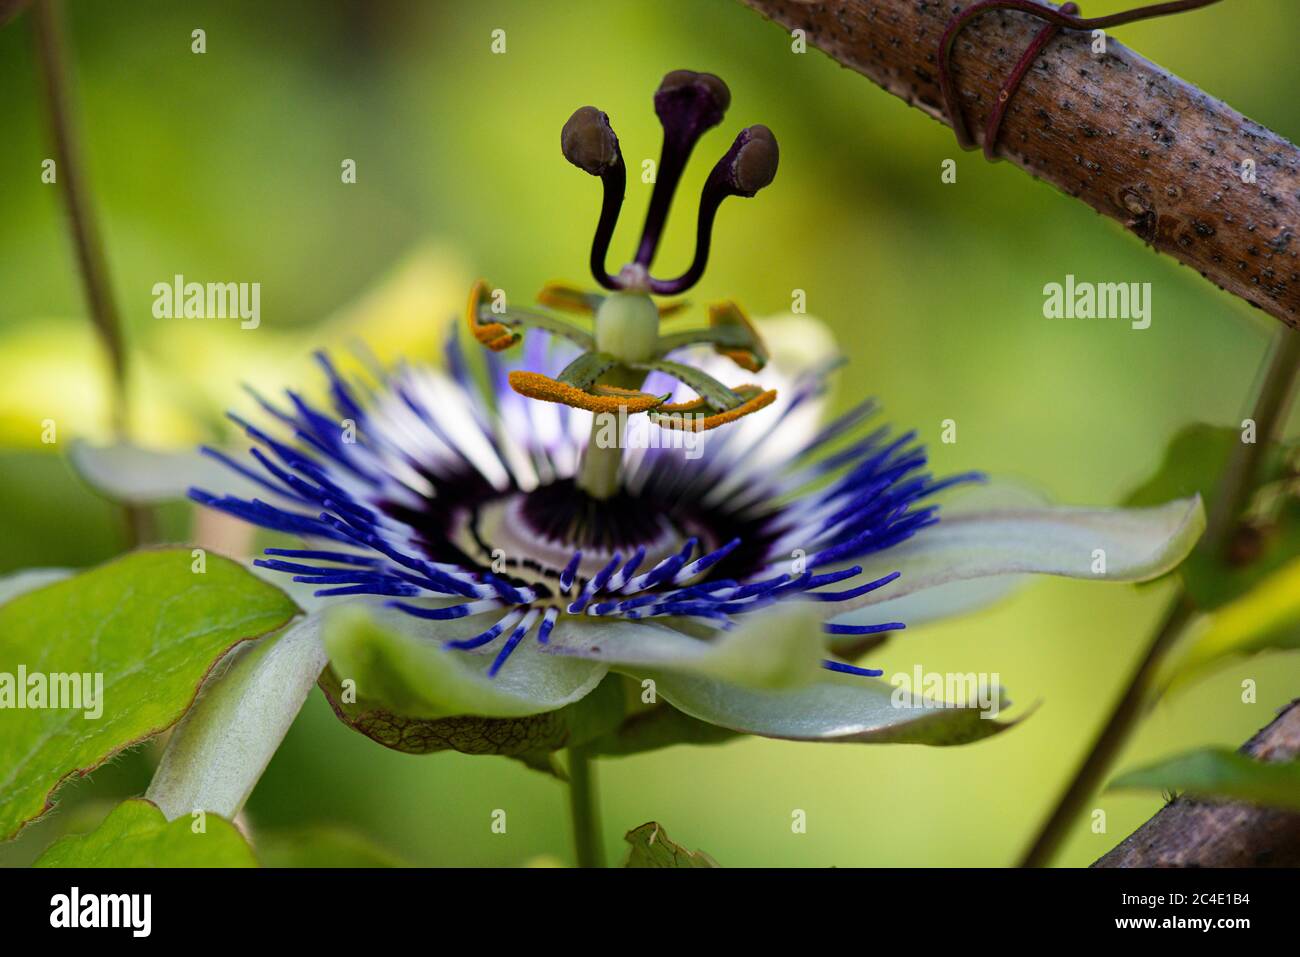 The flower of a blue passion flower (Passiflora caerulea) Stock Photo